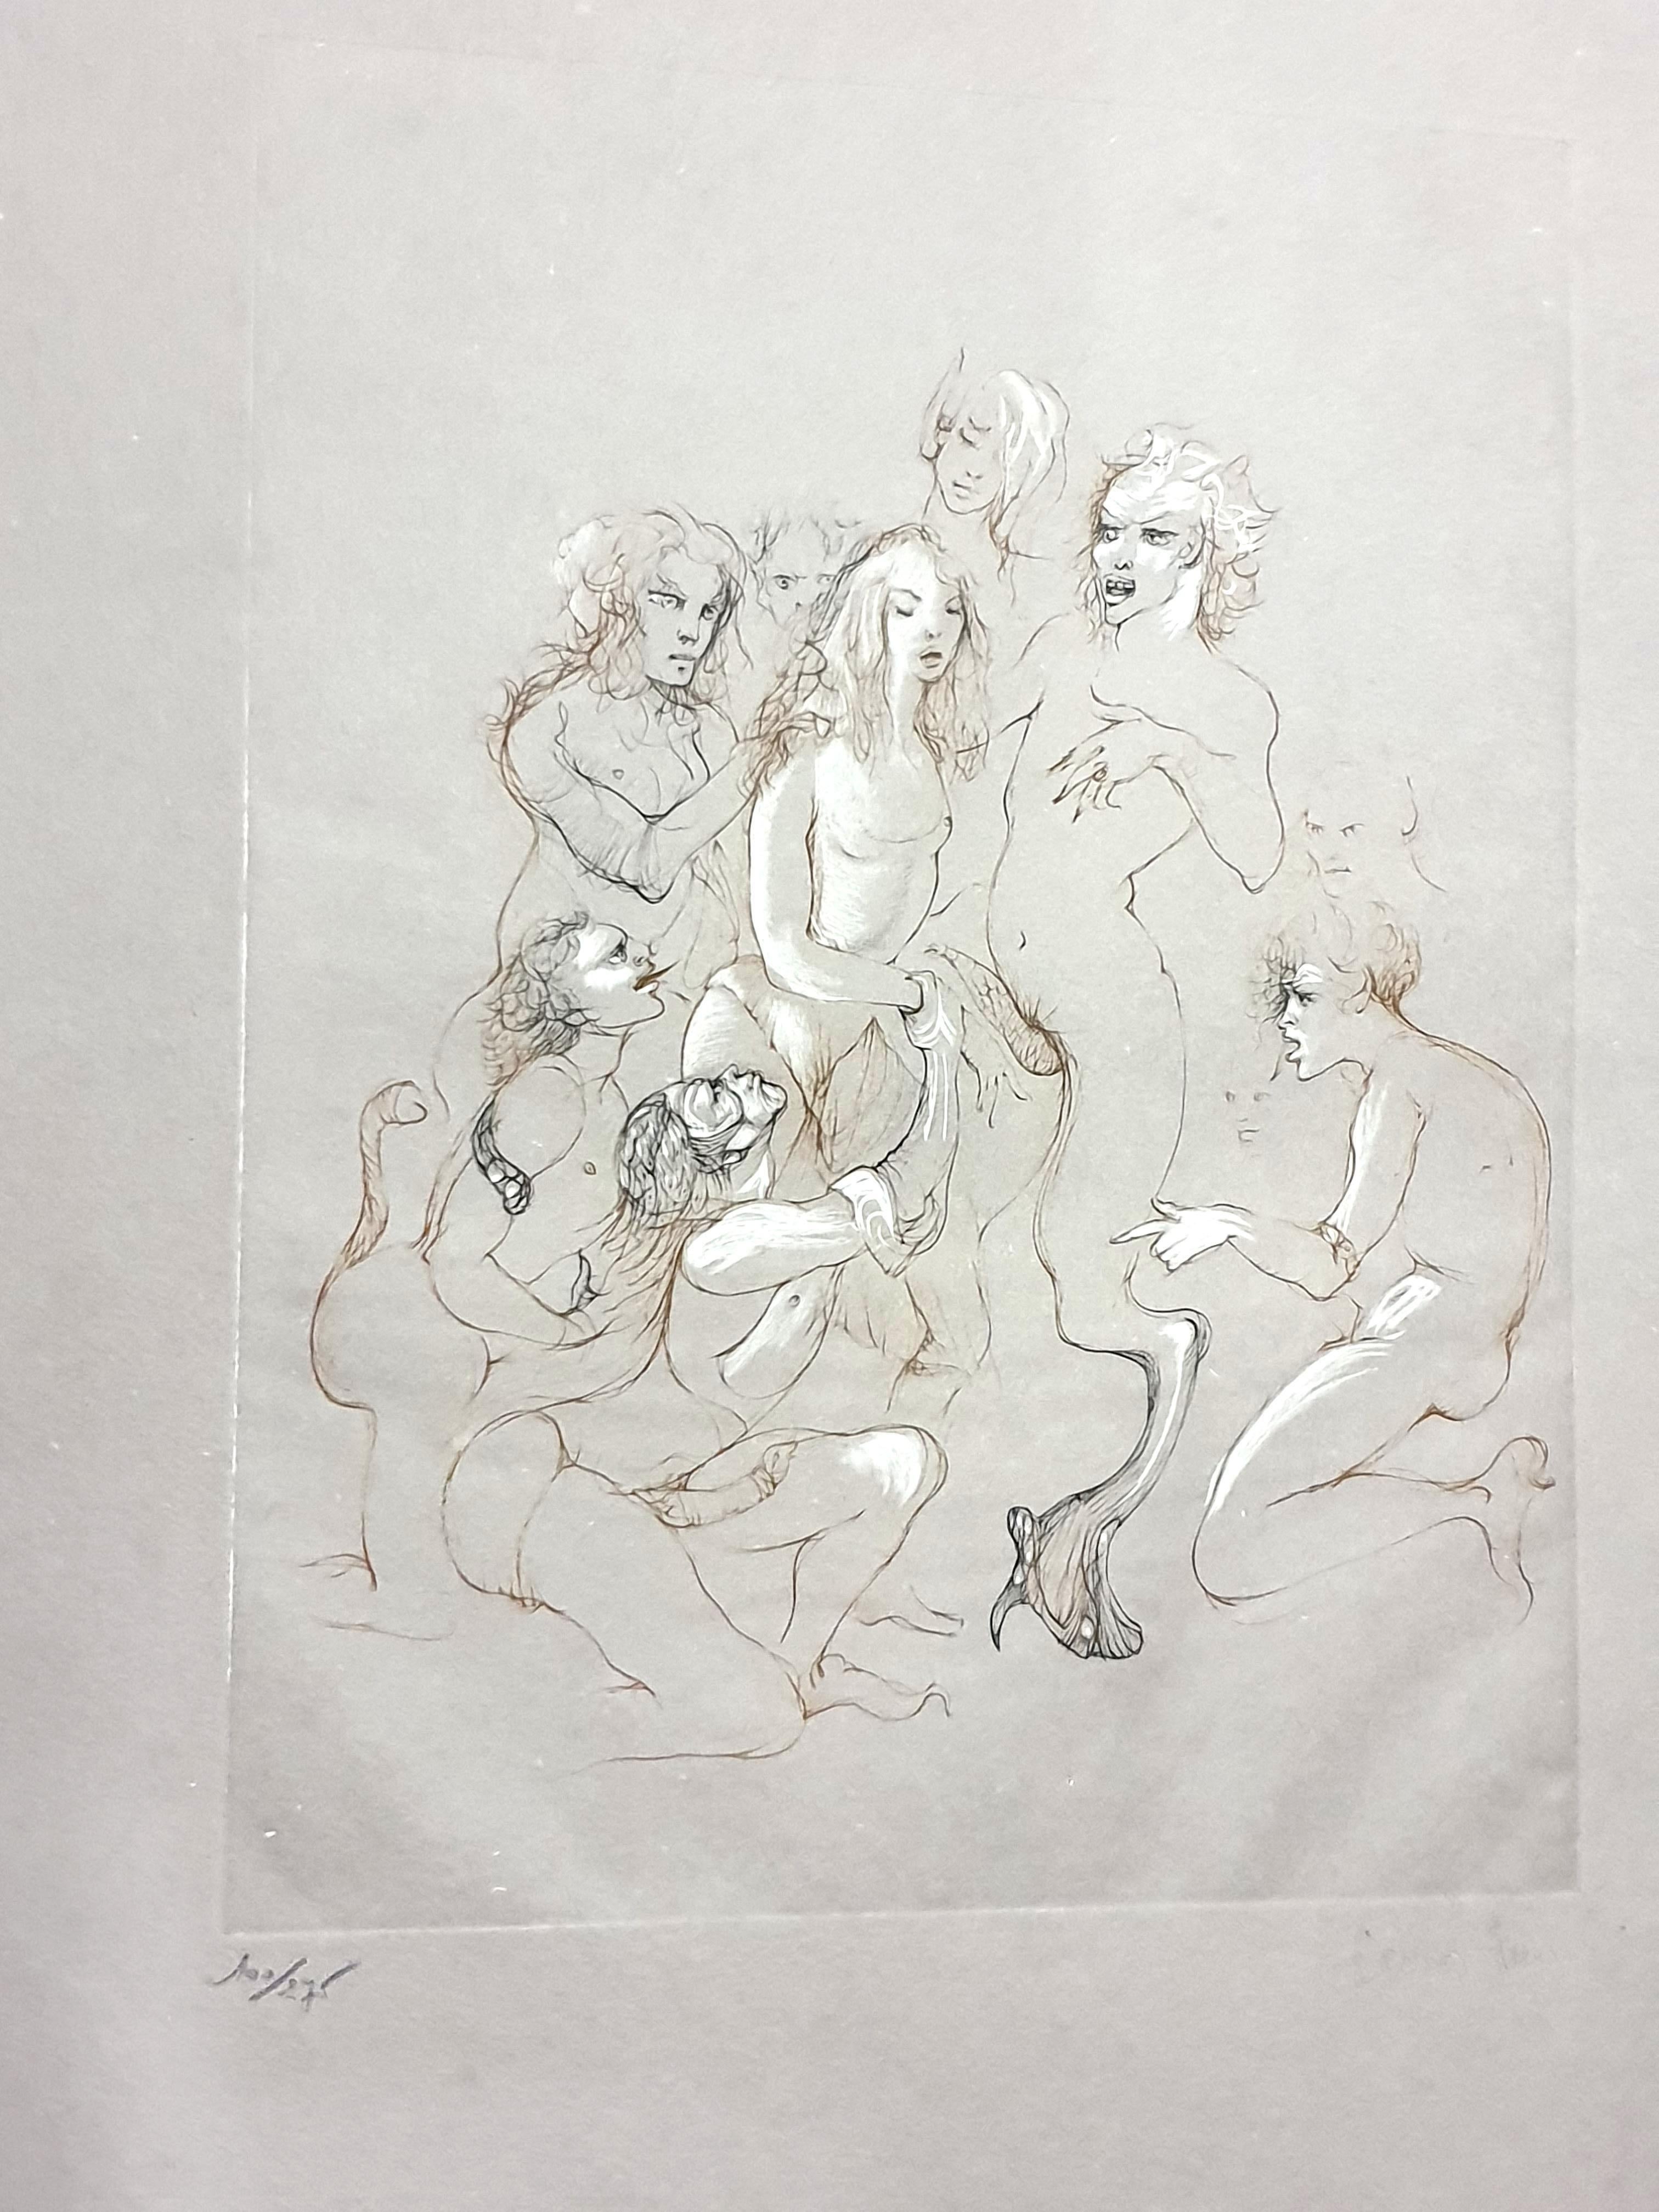 Leonor Fini - Orgy - Original Handsigned Lithograph
Circa 1982
On colored paper
Handsigned and Numbered
Edition: 275
Dimensions: 69 x 52.5 cm 